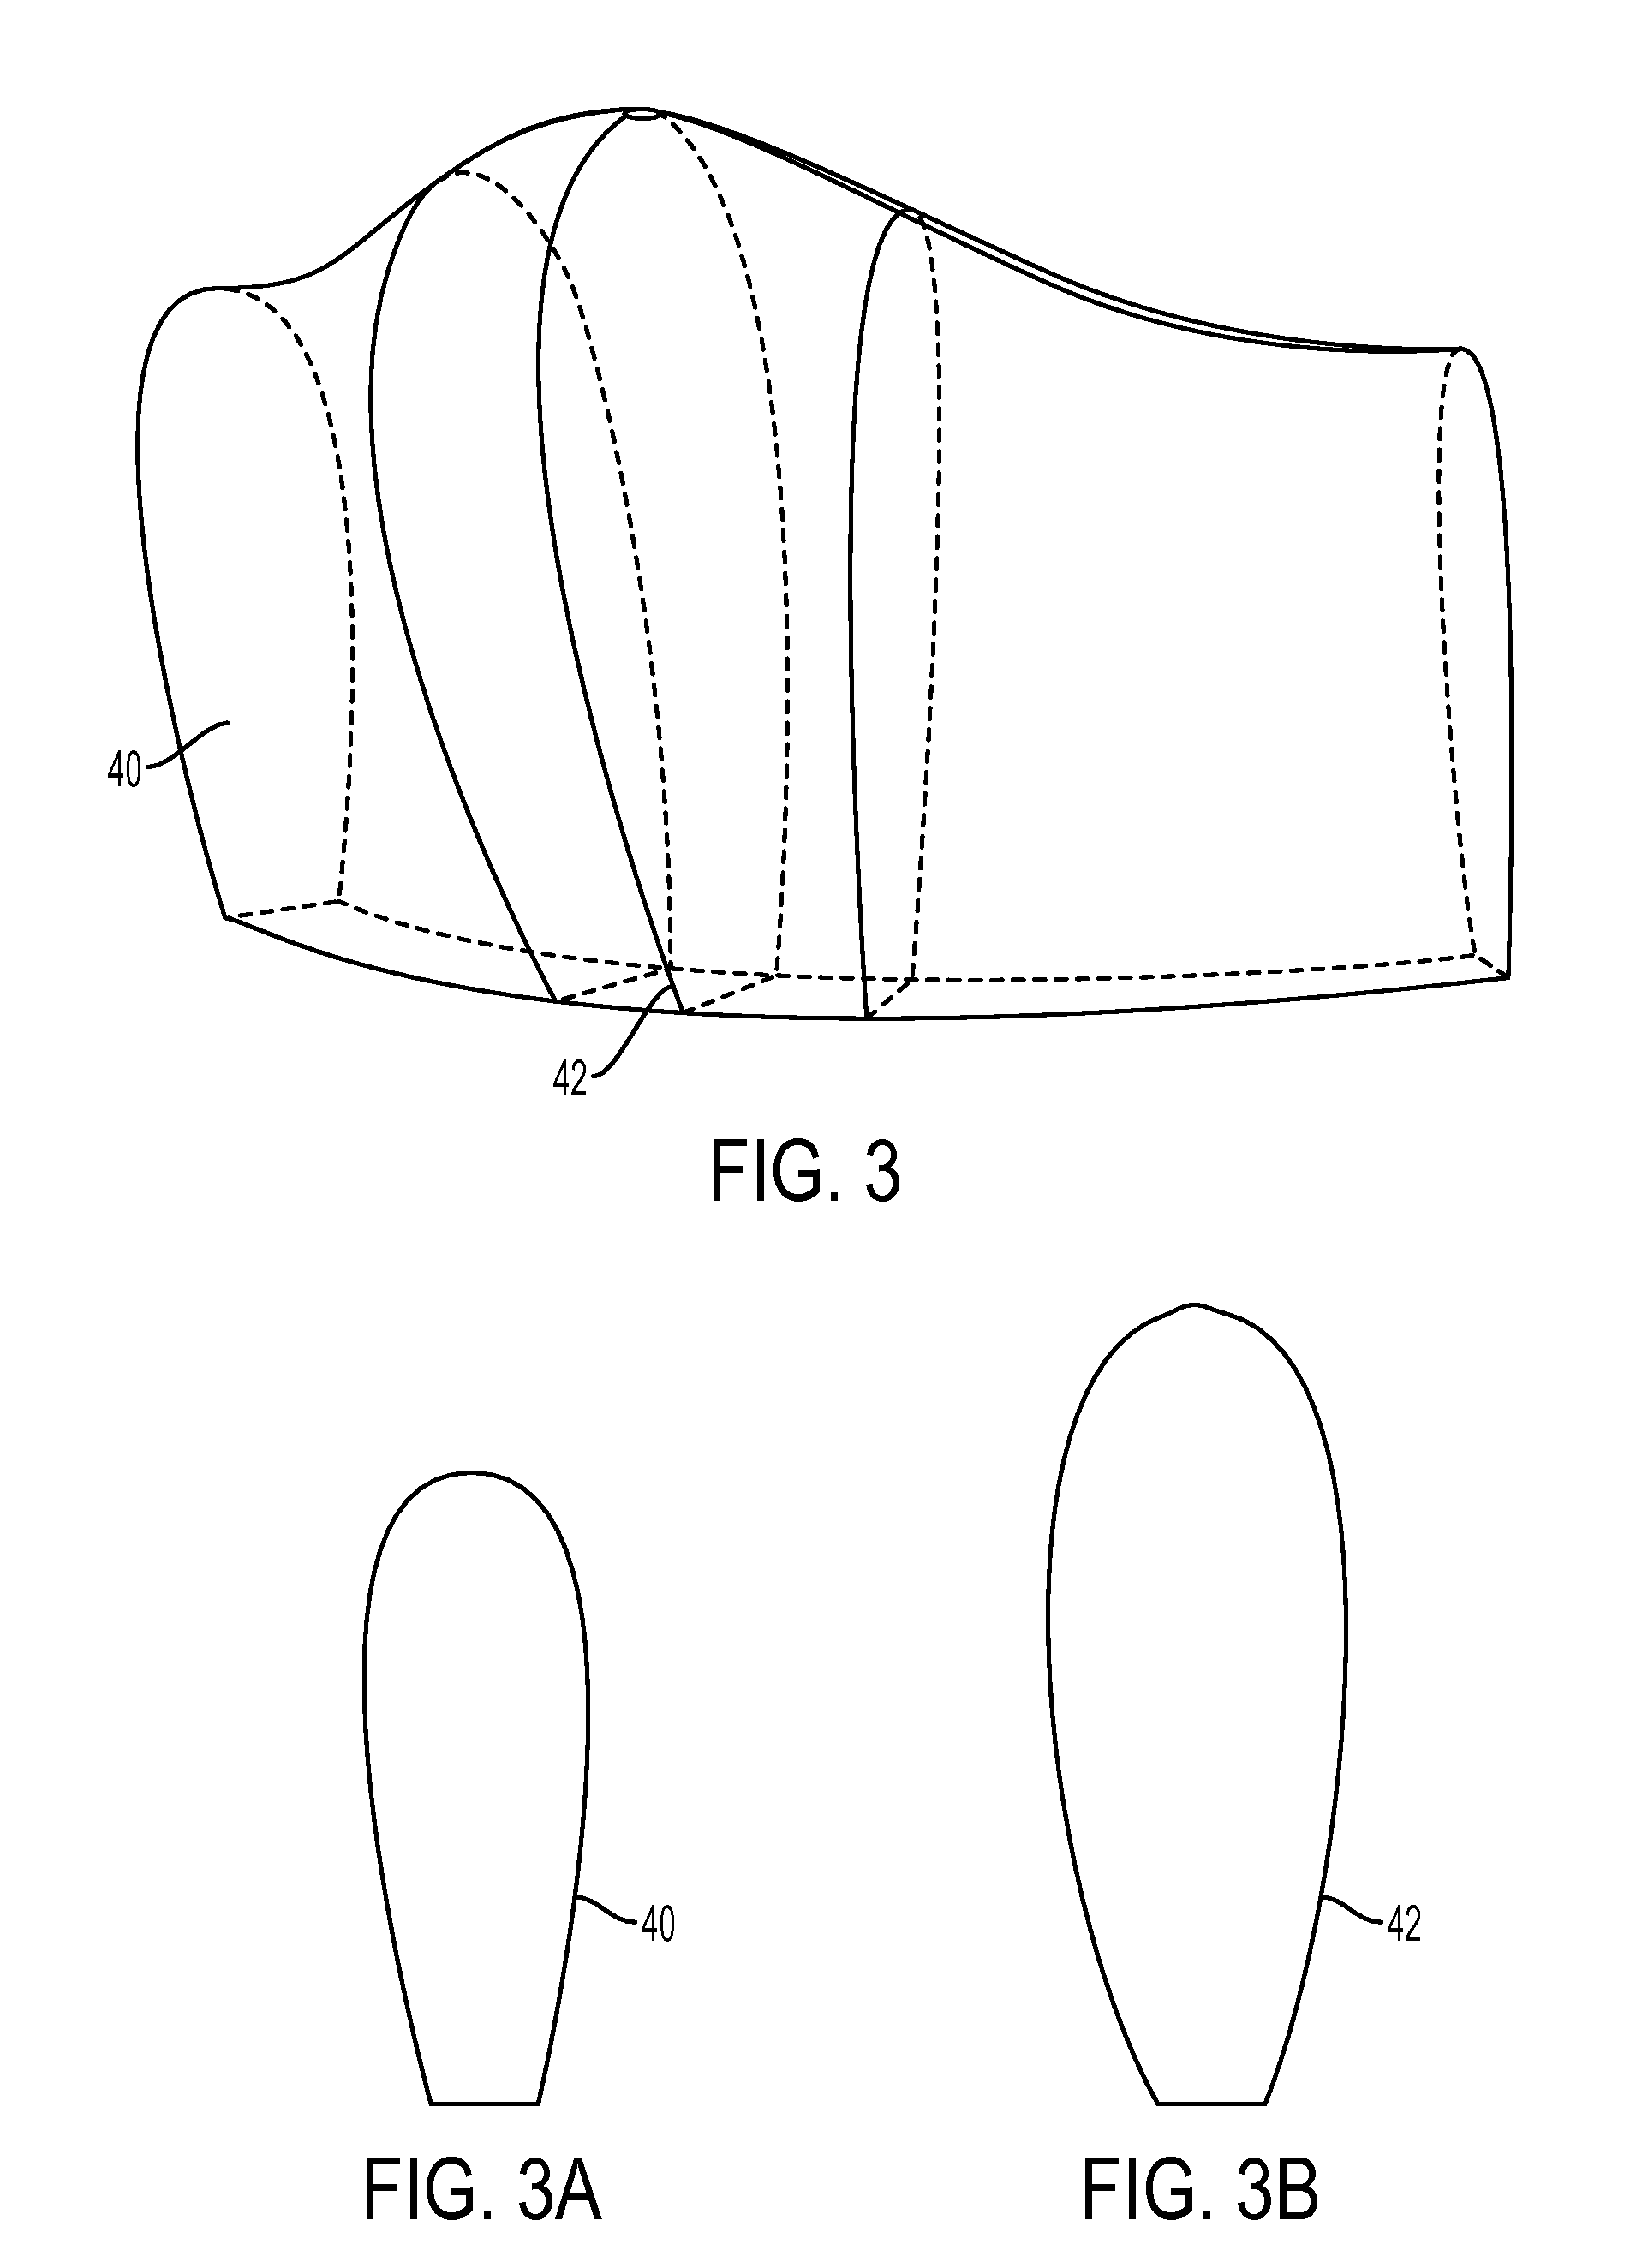 Vertical non-bladdered fuel tank for a ducted fan vehicle